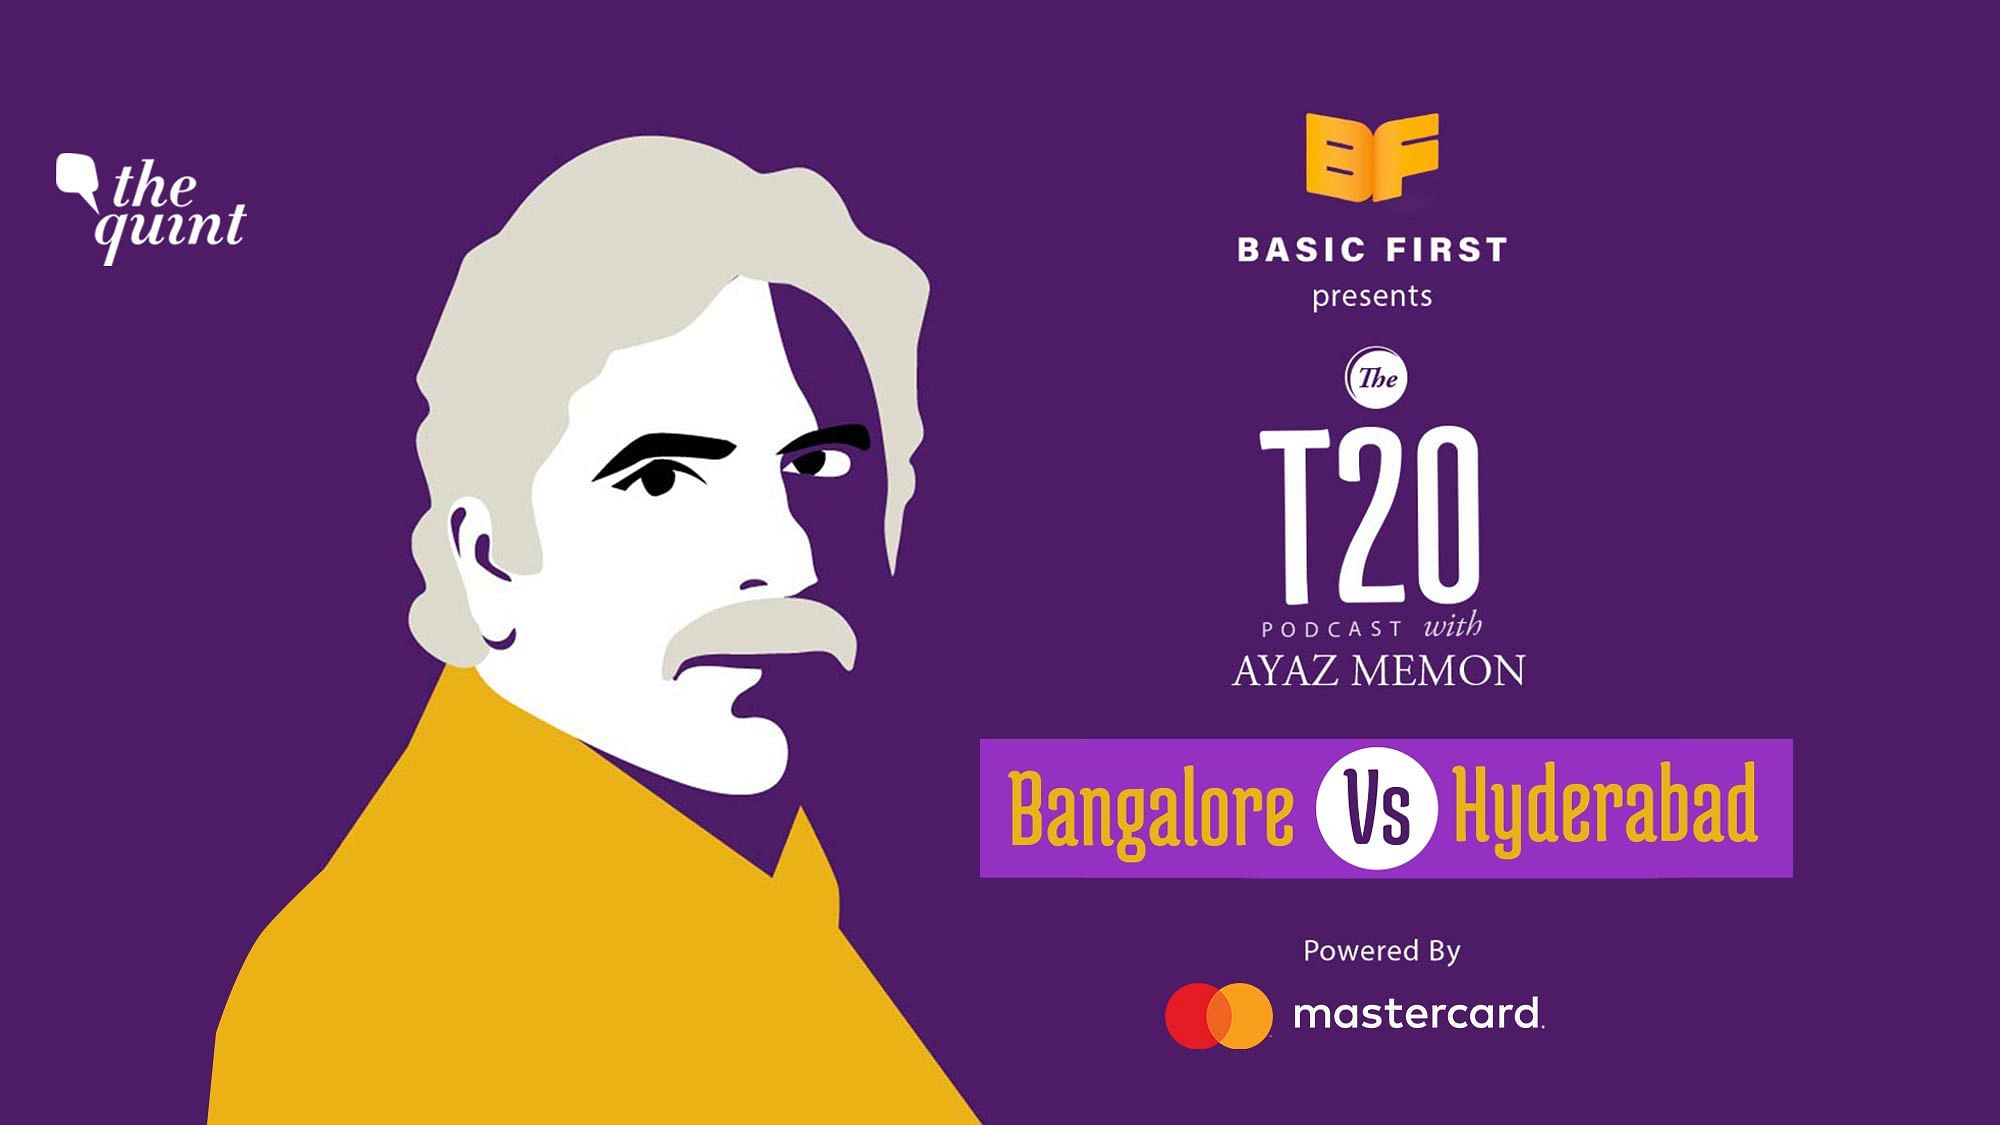 On episode 3 of The T20 Podcast, Ayaz Memon talks about Hyderabad’s defeat to Bangalore in both teams’ opening match of the tournament.&nbsp;